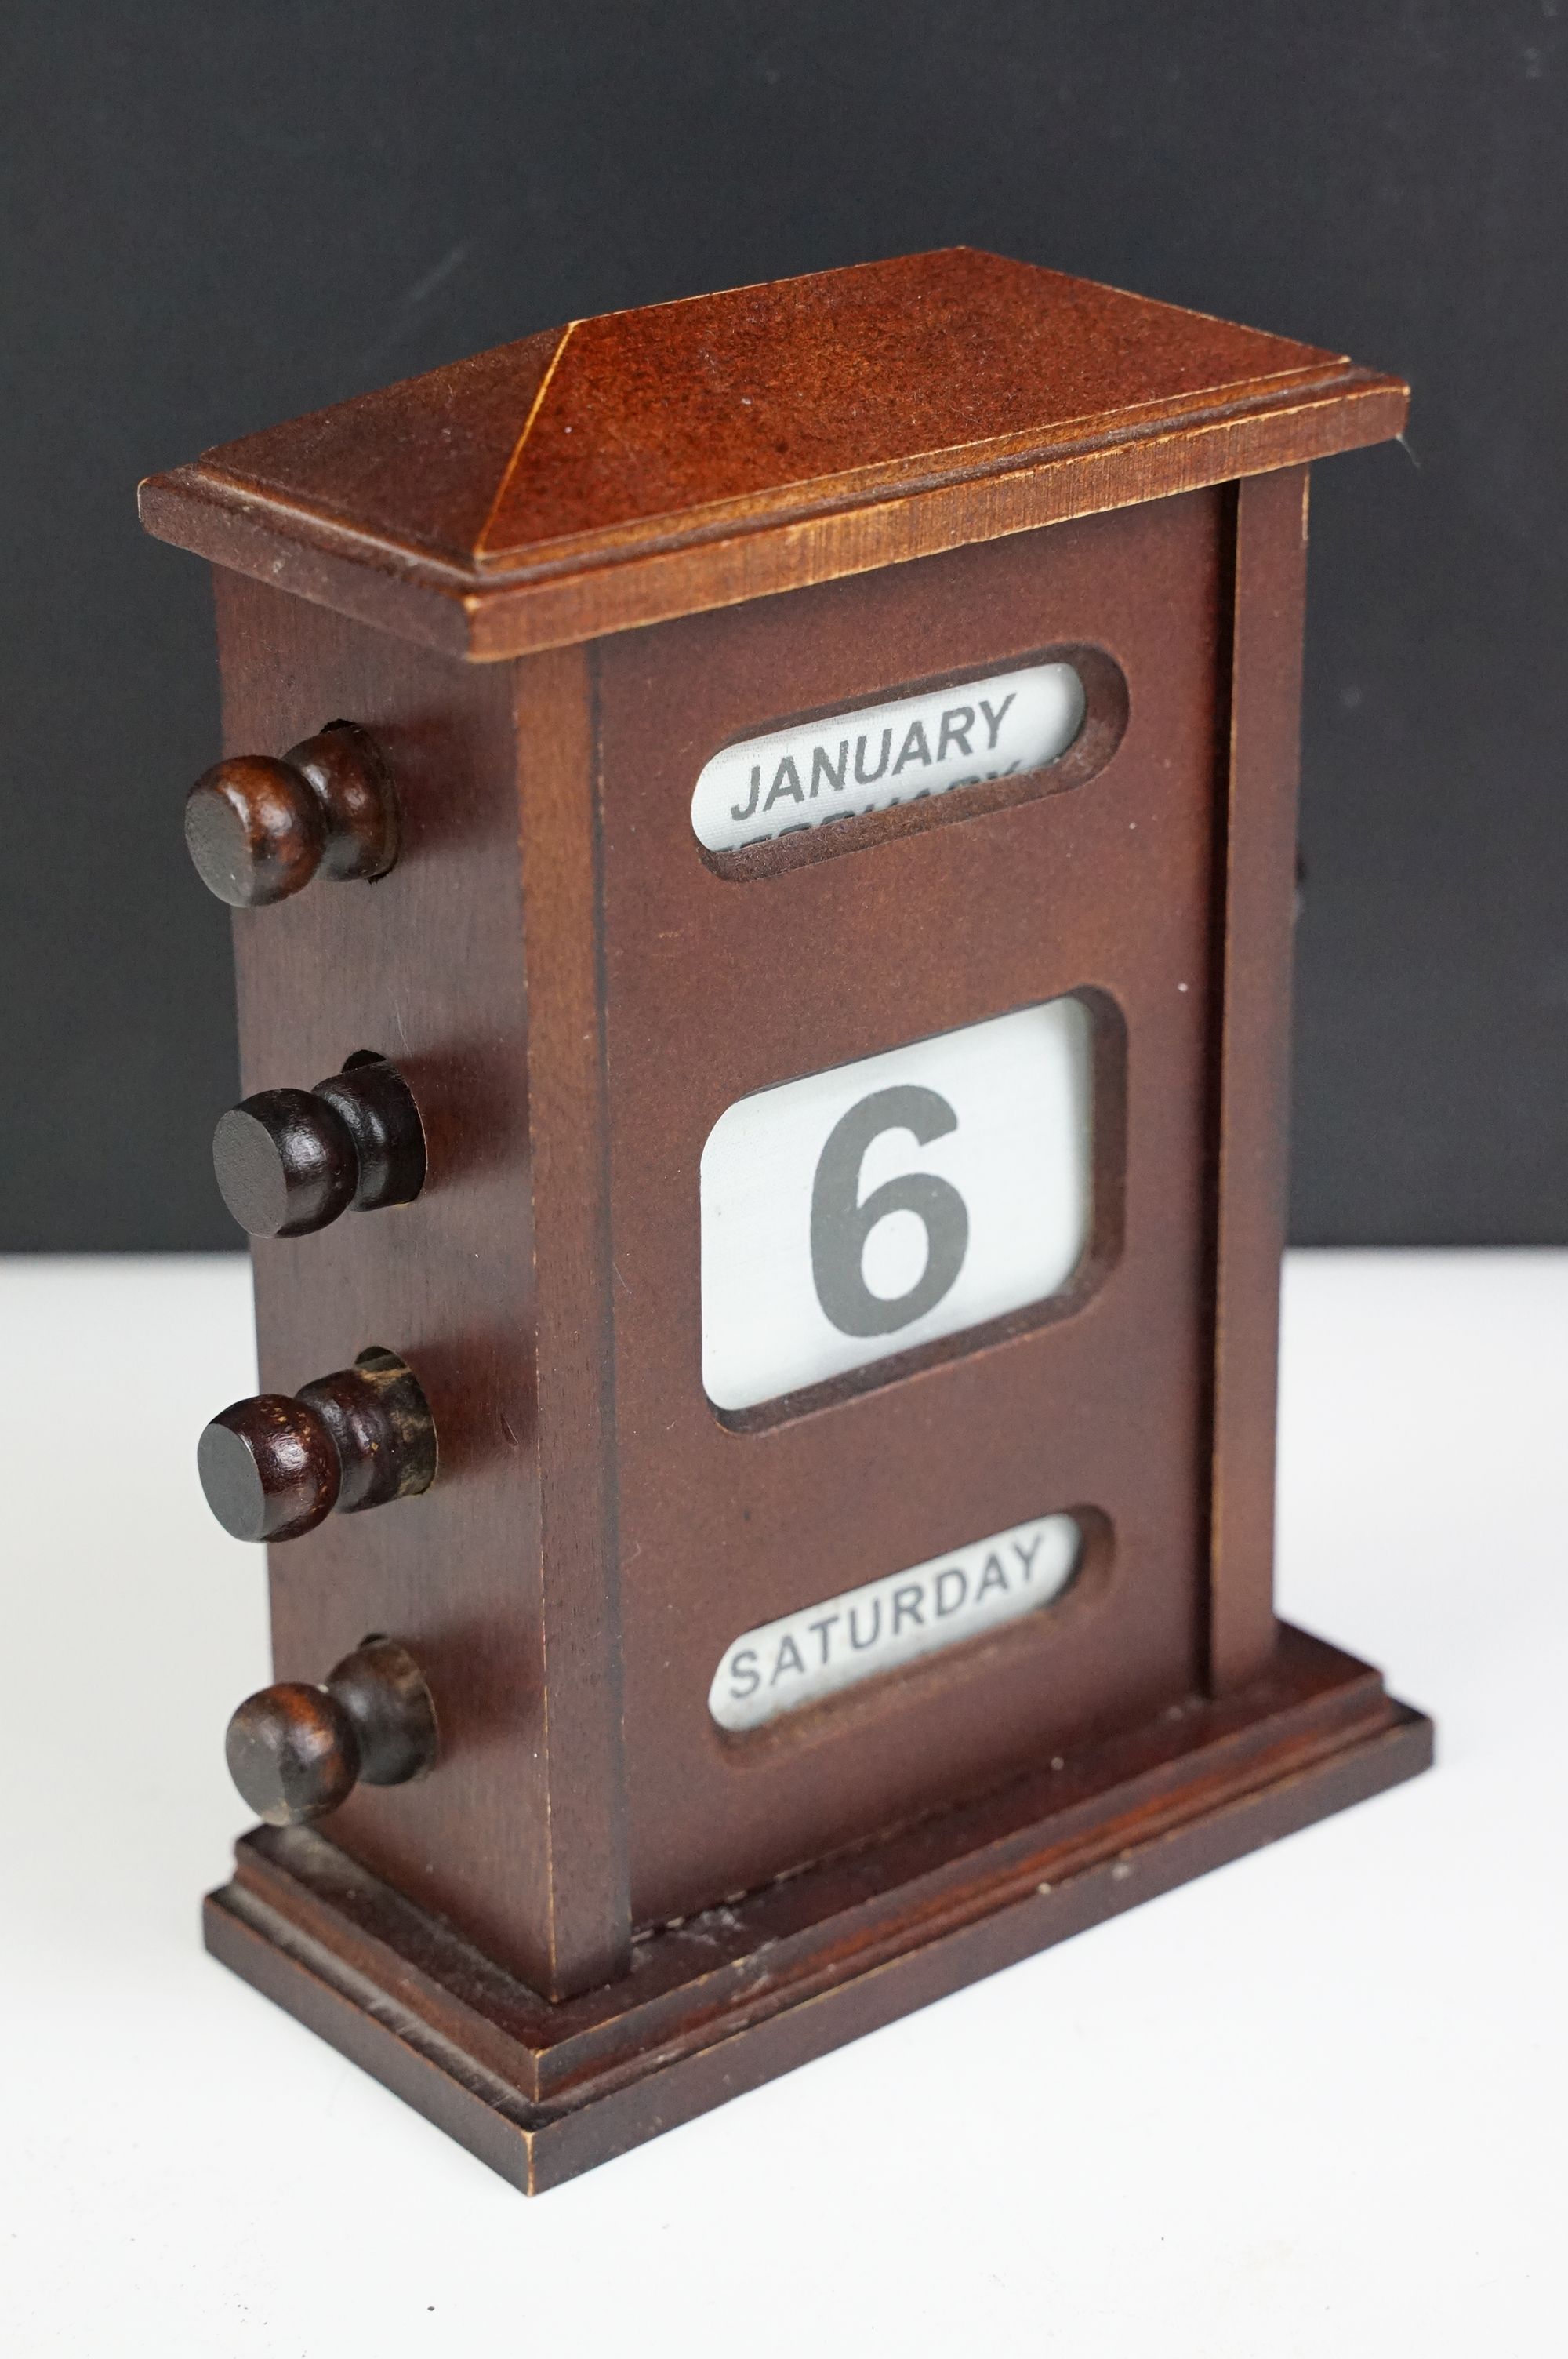 Edwardian style Wooden Cased Perpetual Desk Calendar, 18cm high - Image 2 of 5